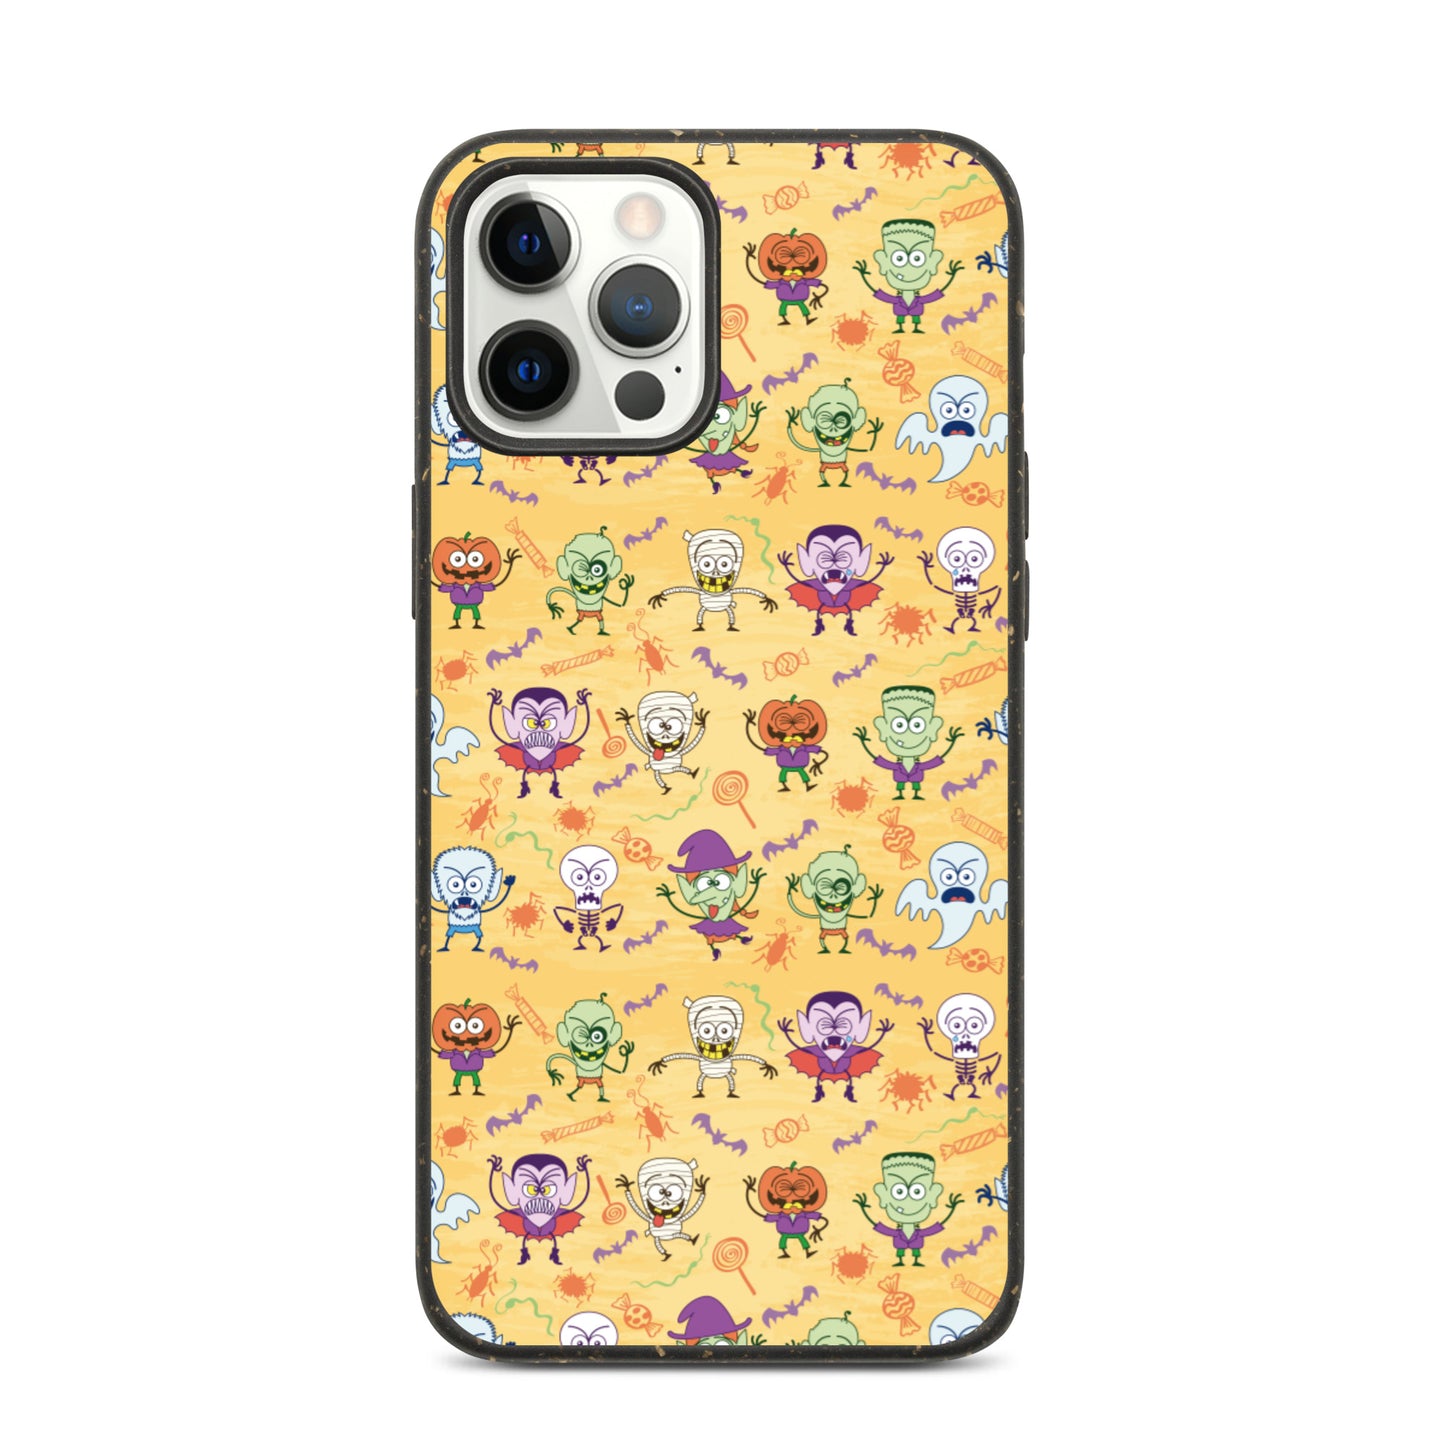 Halloween characters making funny faces Speckled iPhone case. IPhone 12 pro Max